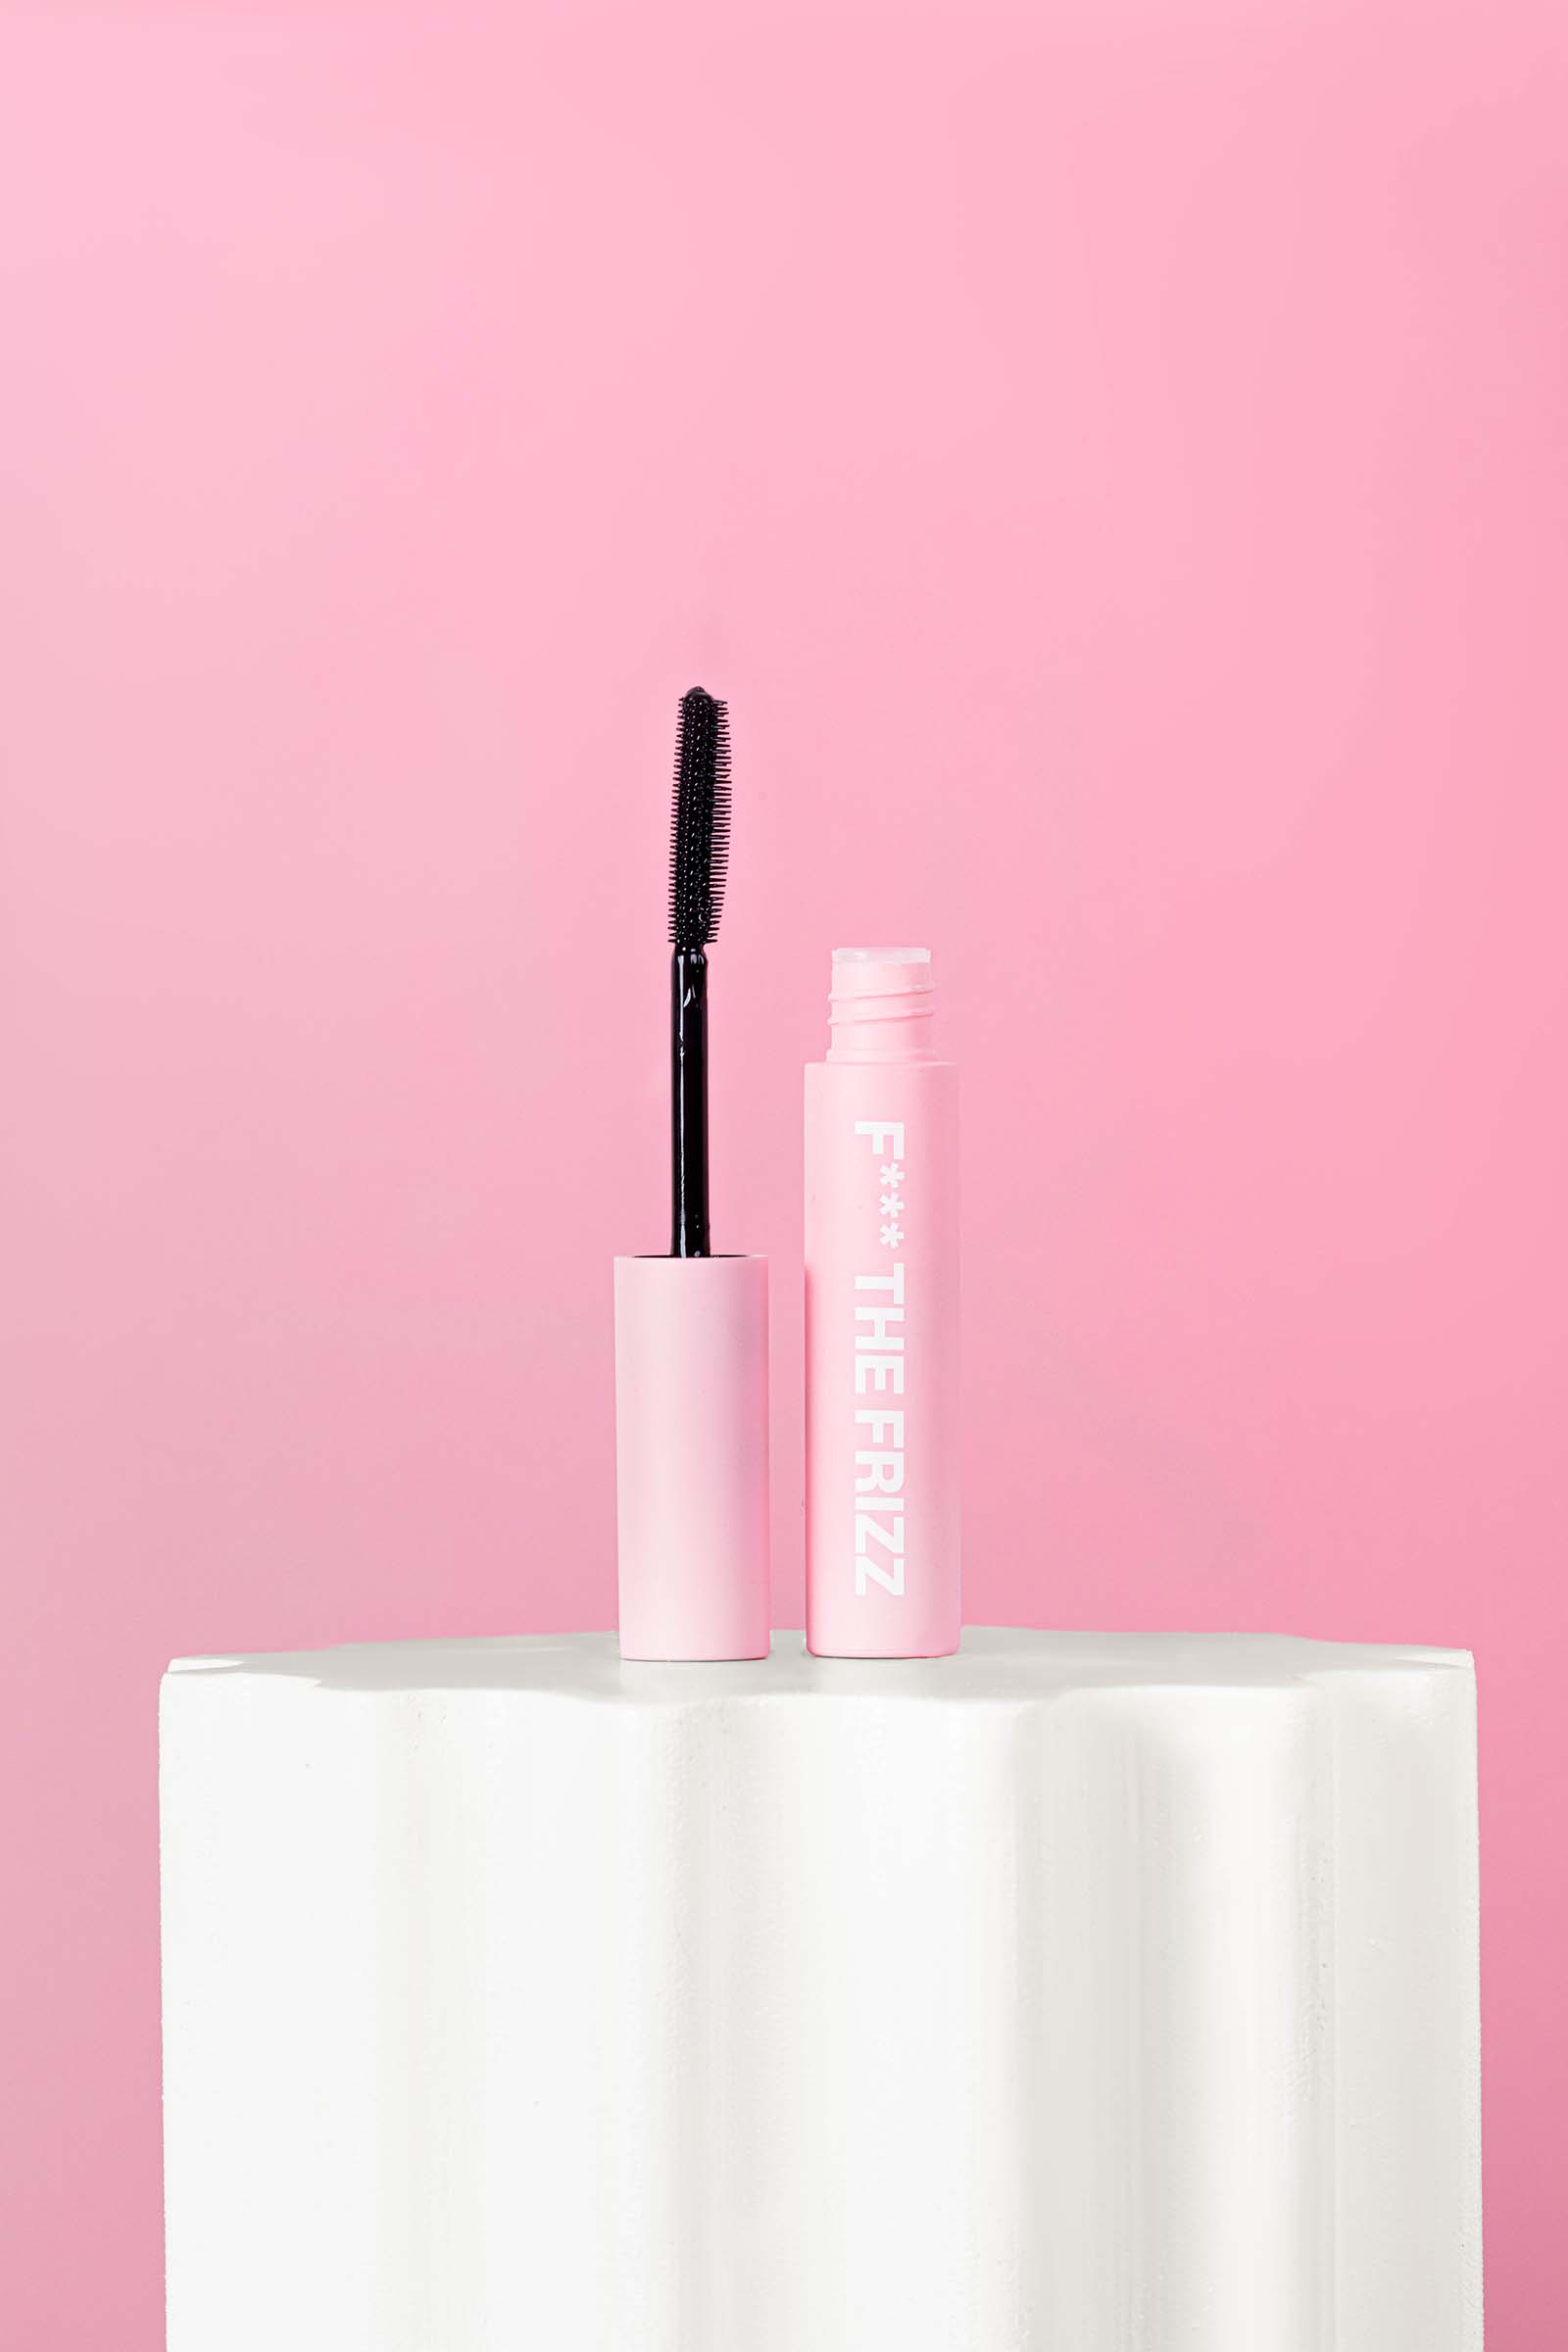 Bold Pink Product Photos for Anit Frizz Hair Wand. Styled content creation by Megzie Makes